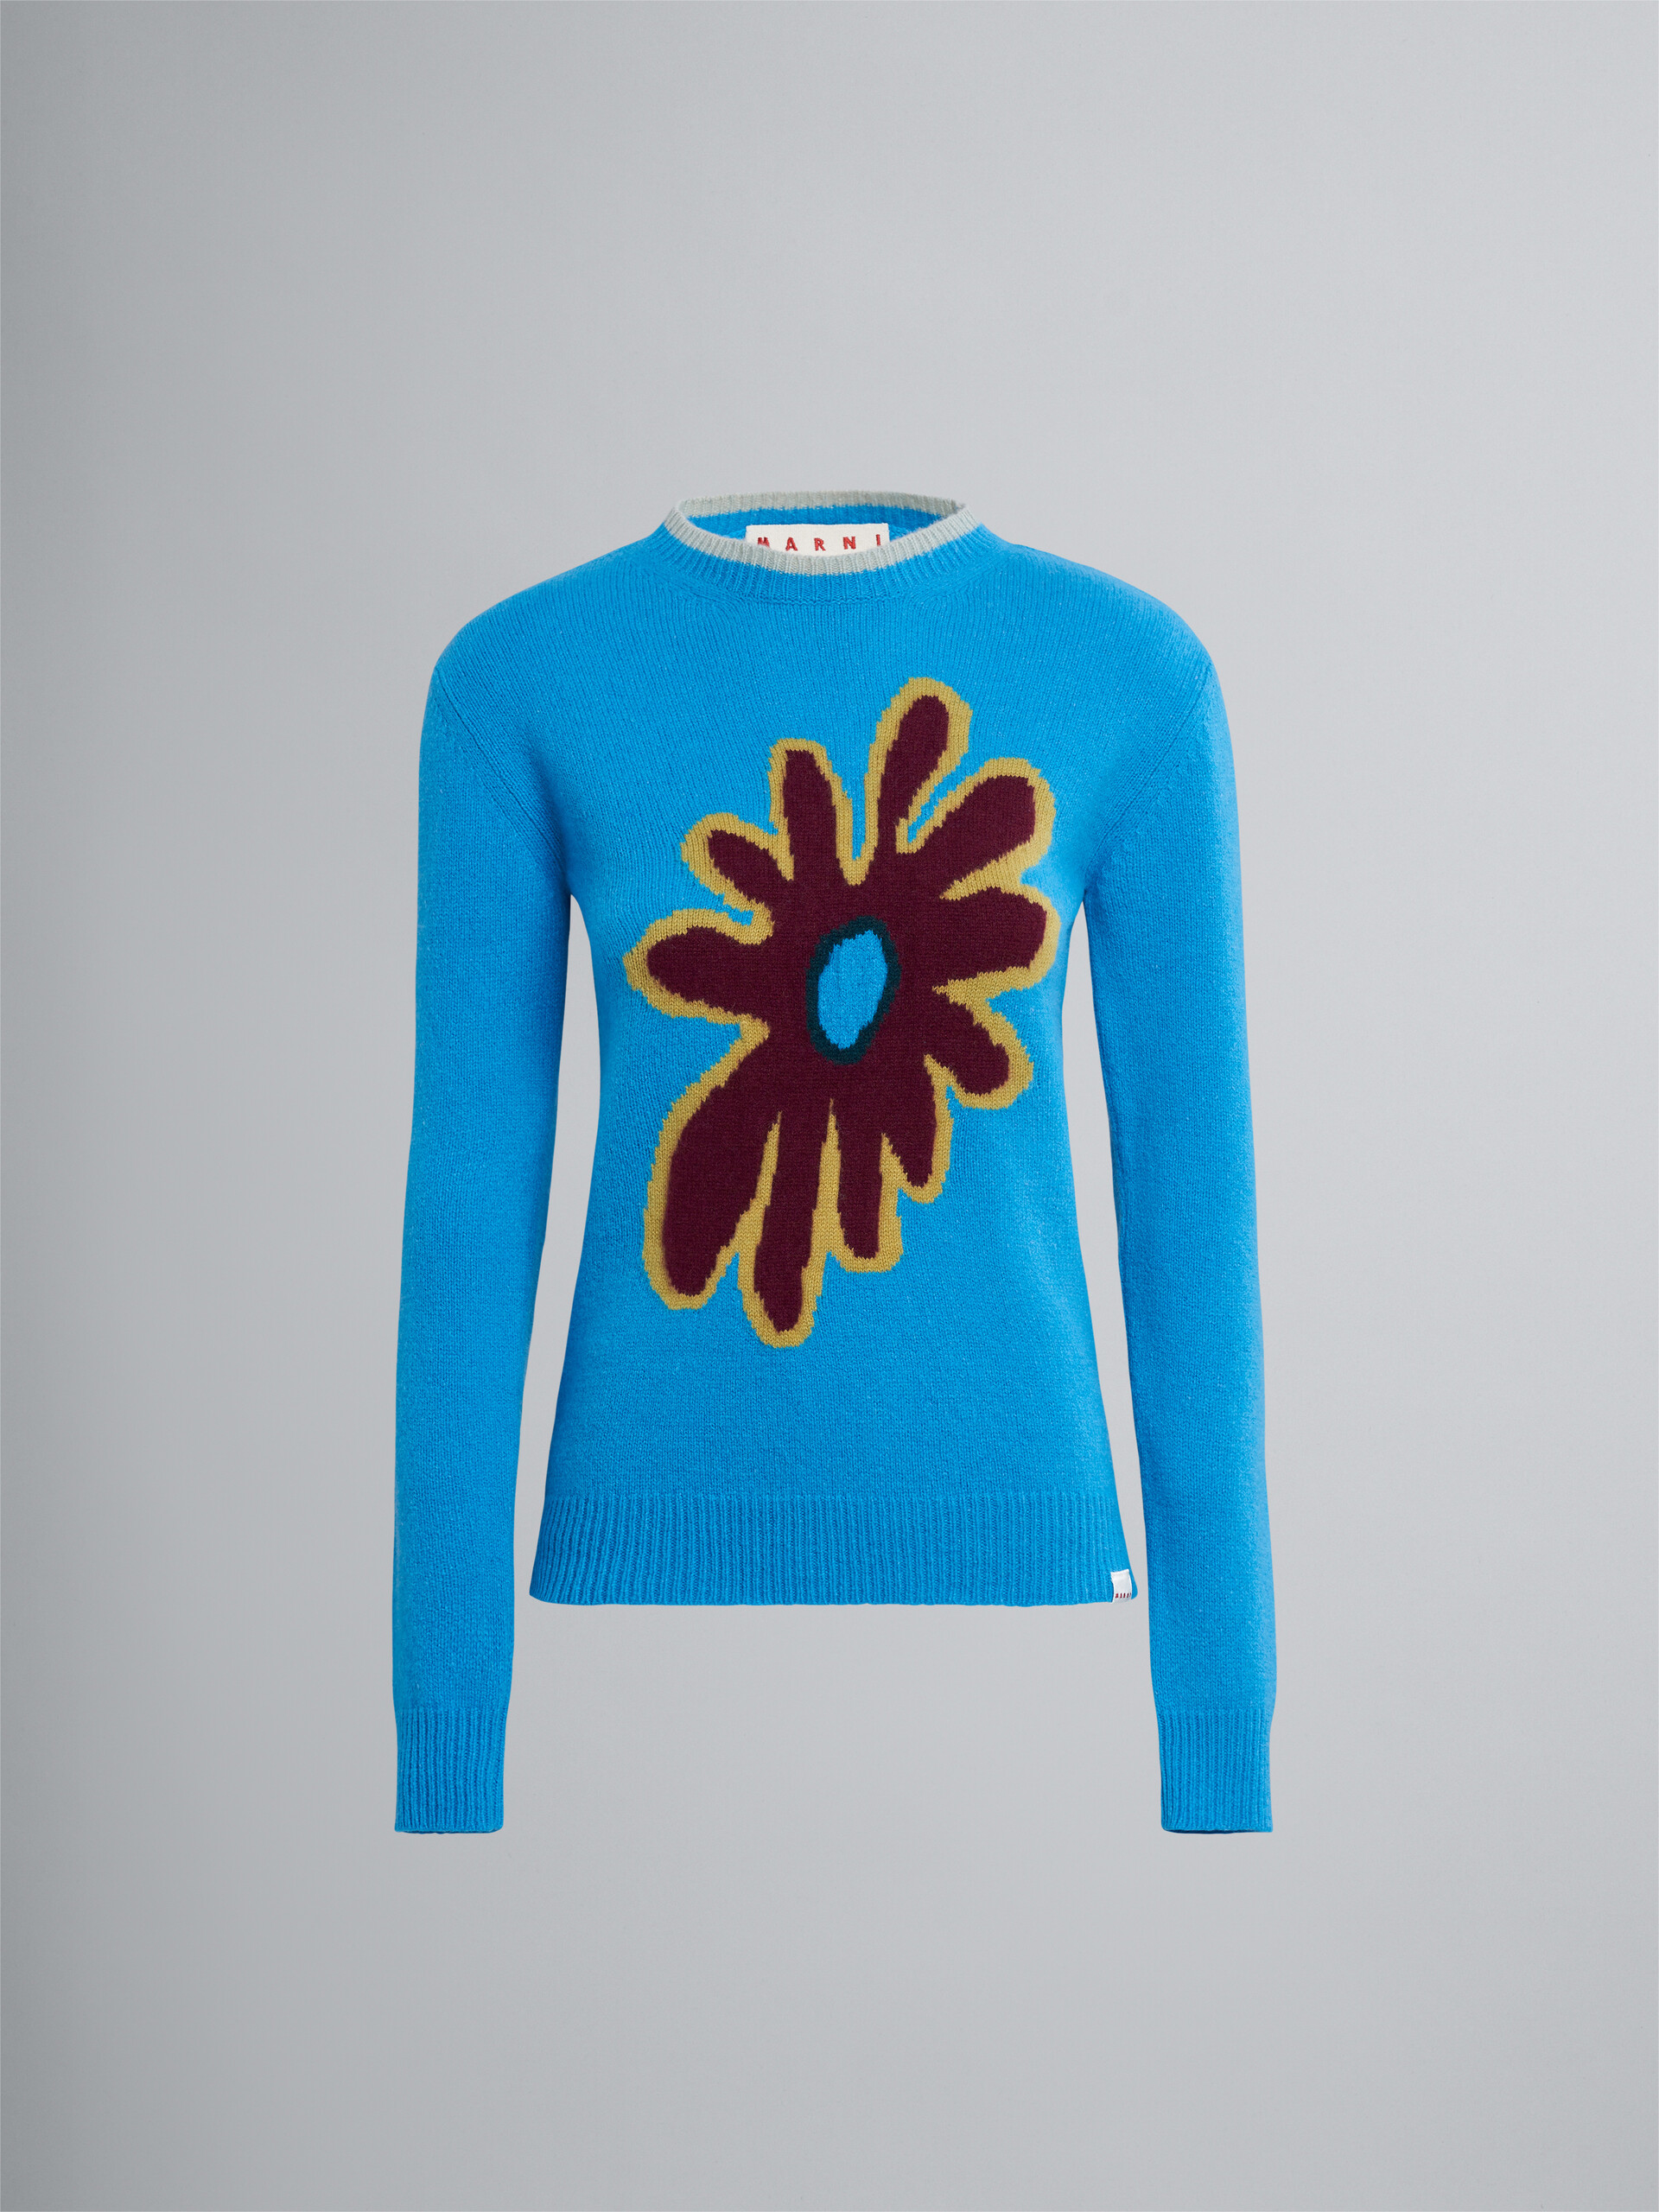 70’s flower cashmere sweater - Pullovers - Image 1